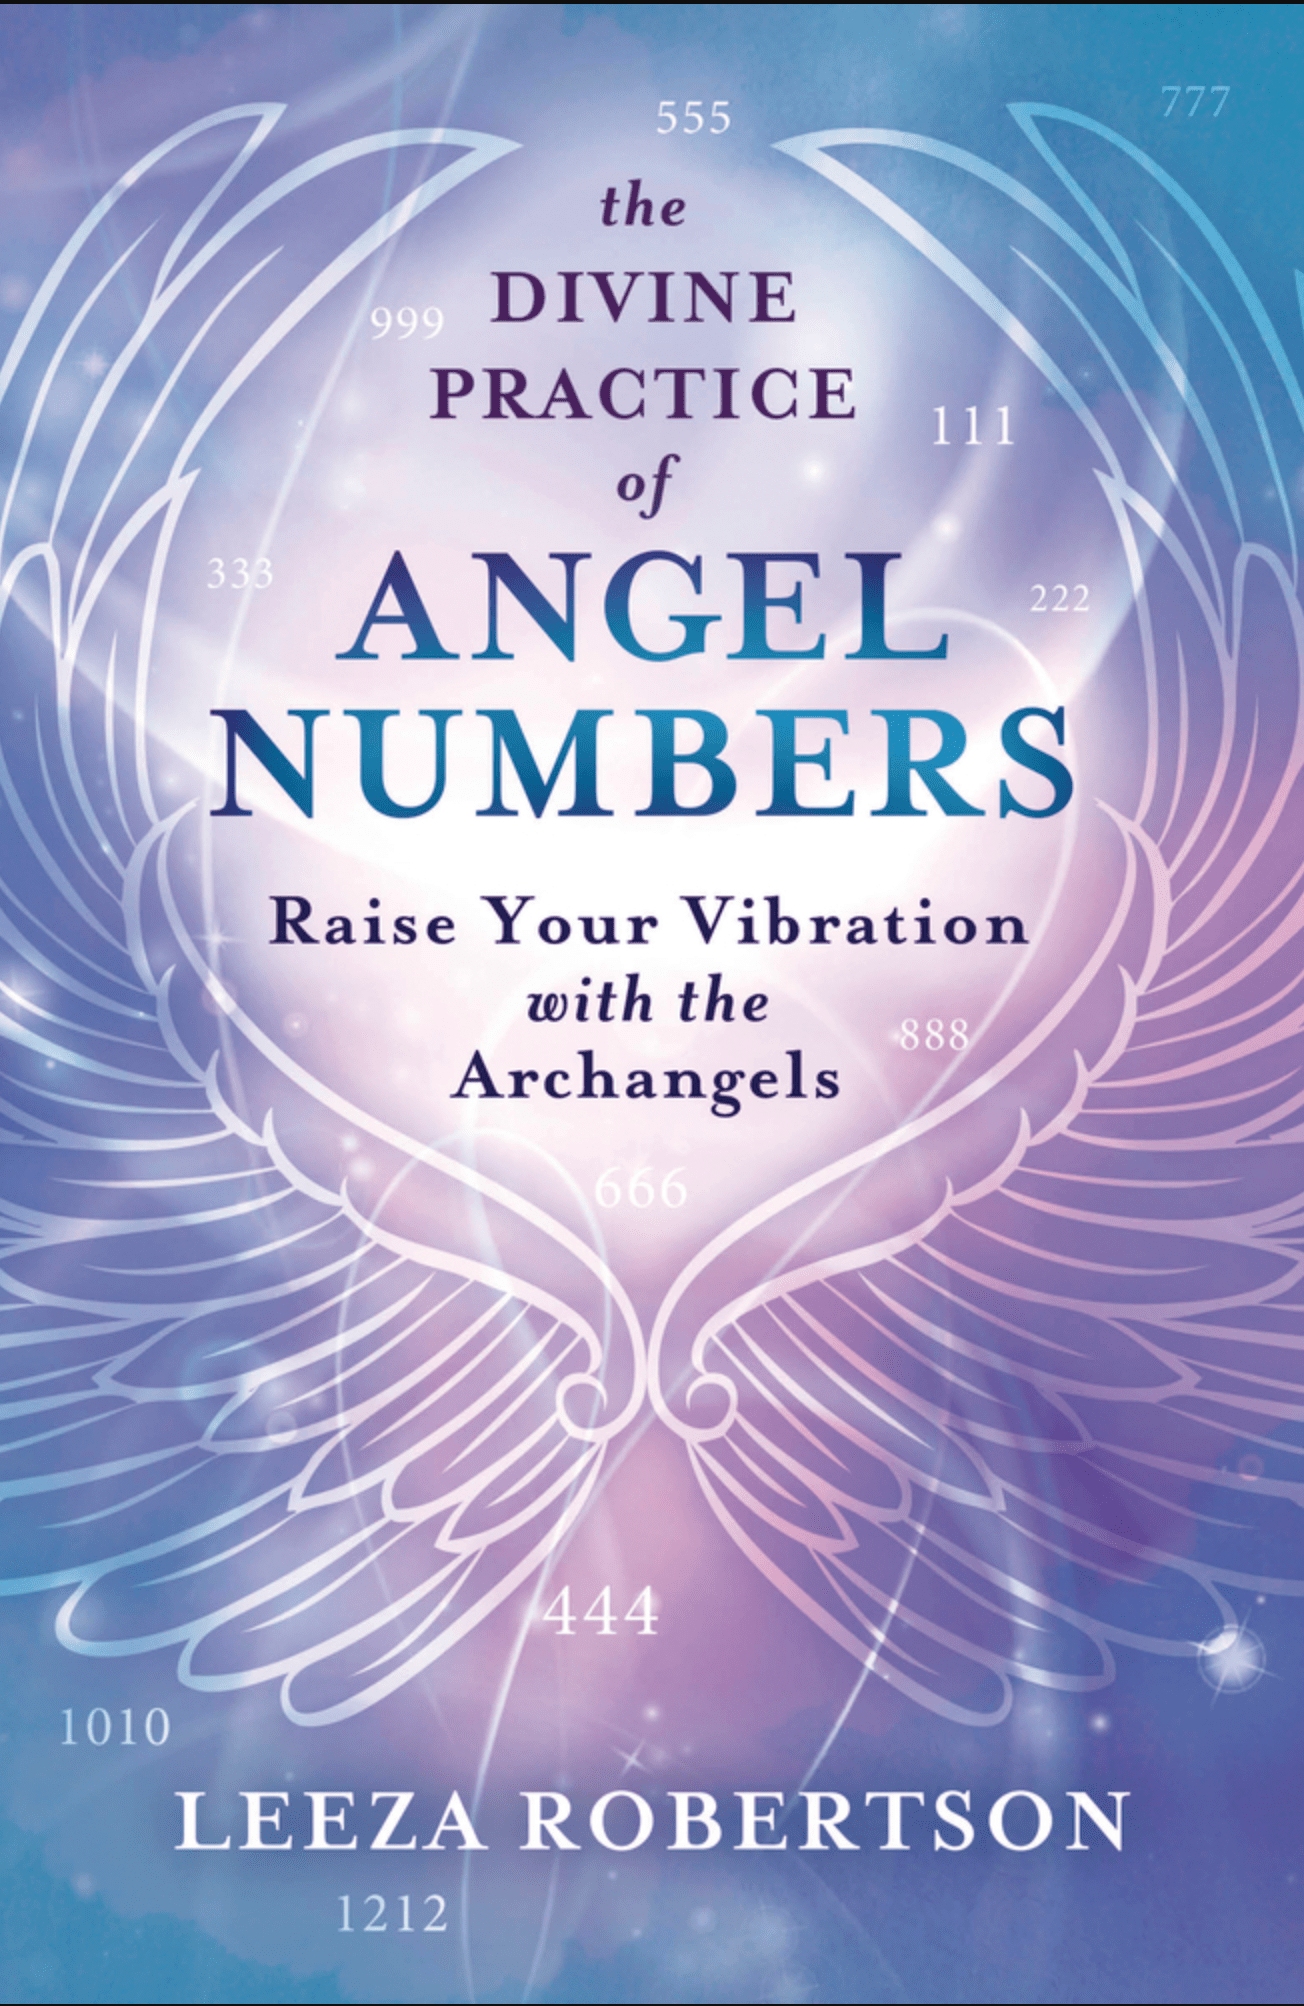 The Divine Practice of Angel Numbers | Raise your Vibration With the Archangels - Spiral Circle